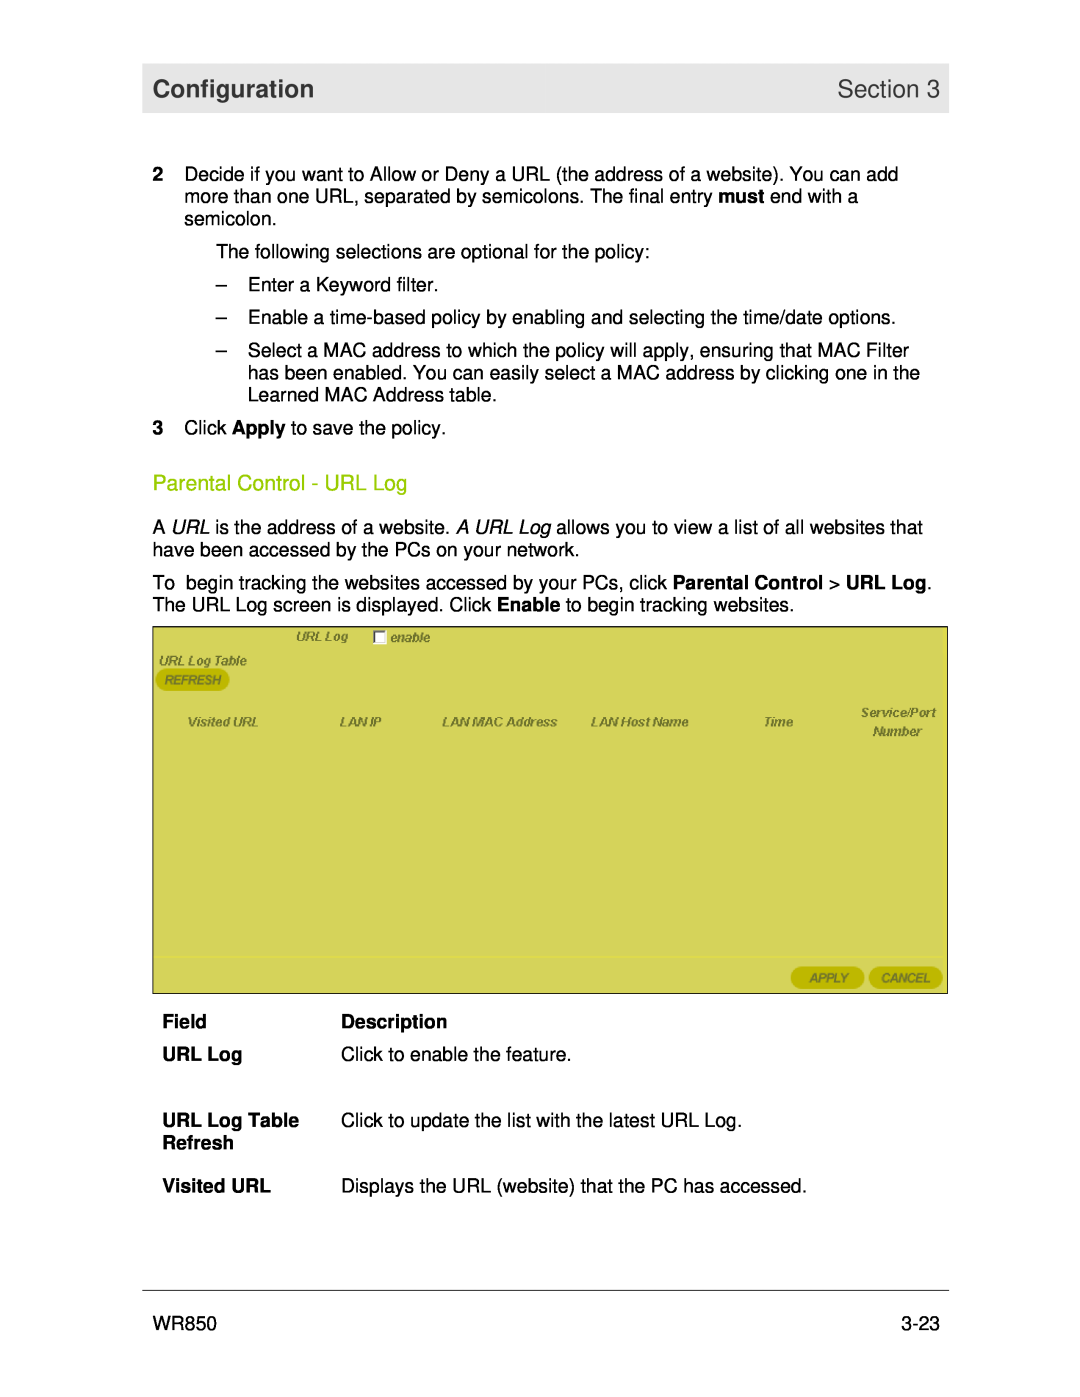 Motorola WR850 manual Parental Control - URL Log, Configuration, Section, Displays the URL website that the PC has accessed 